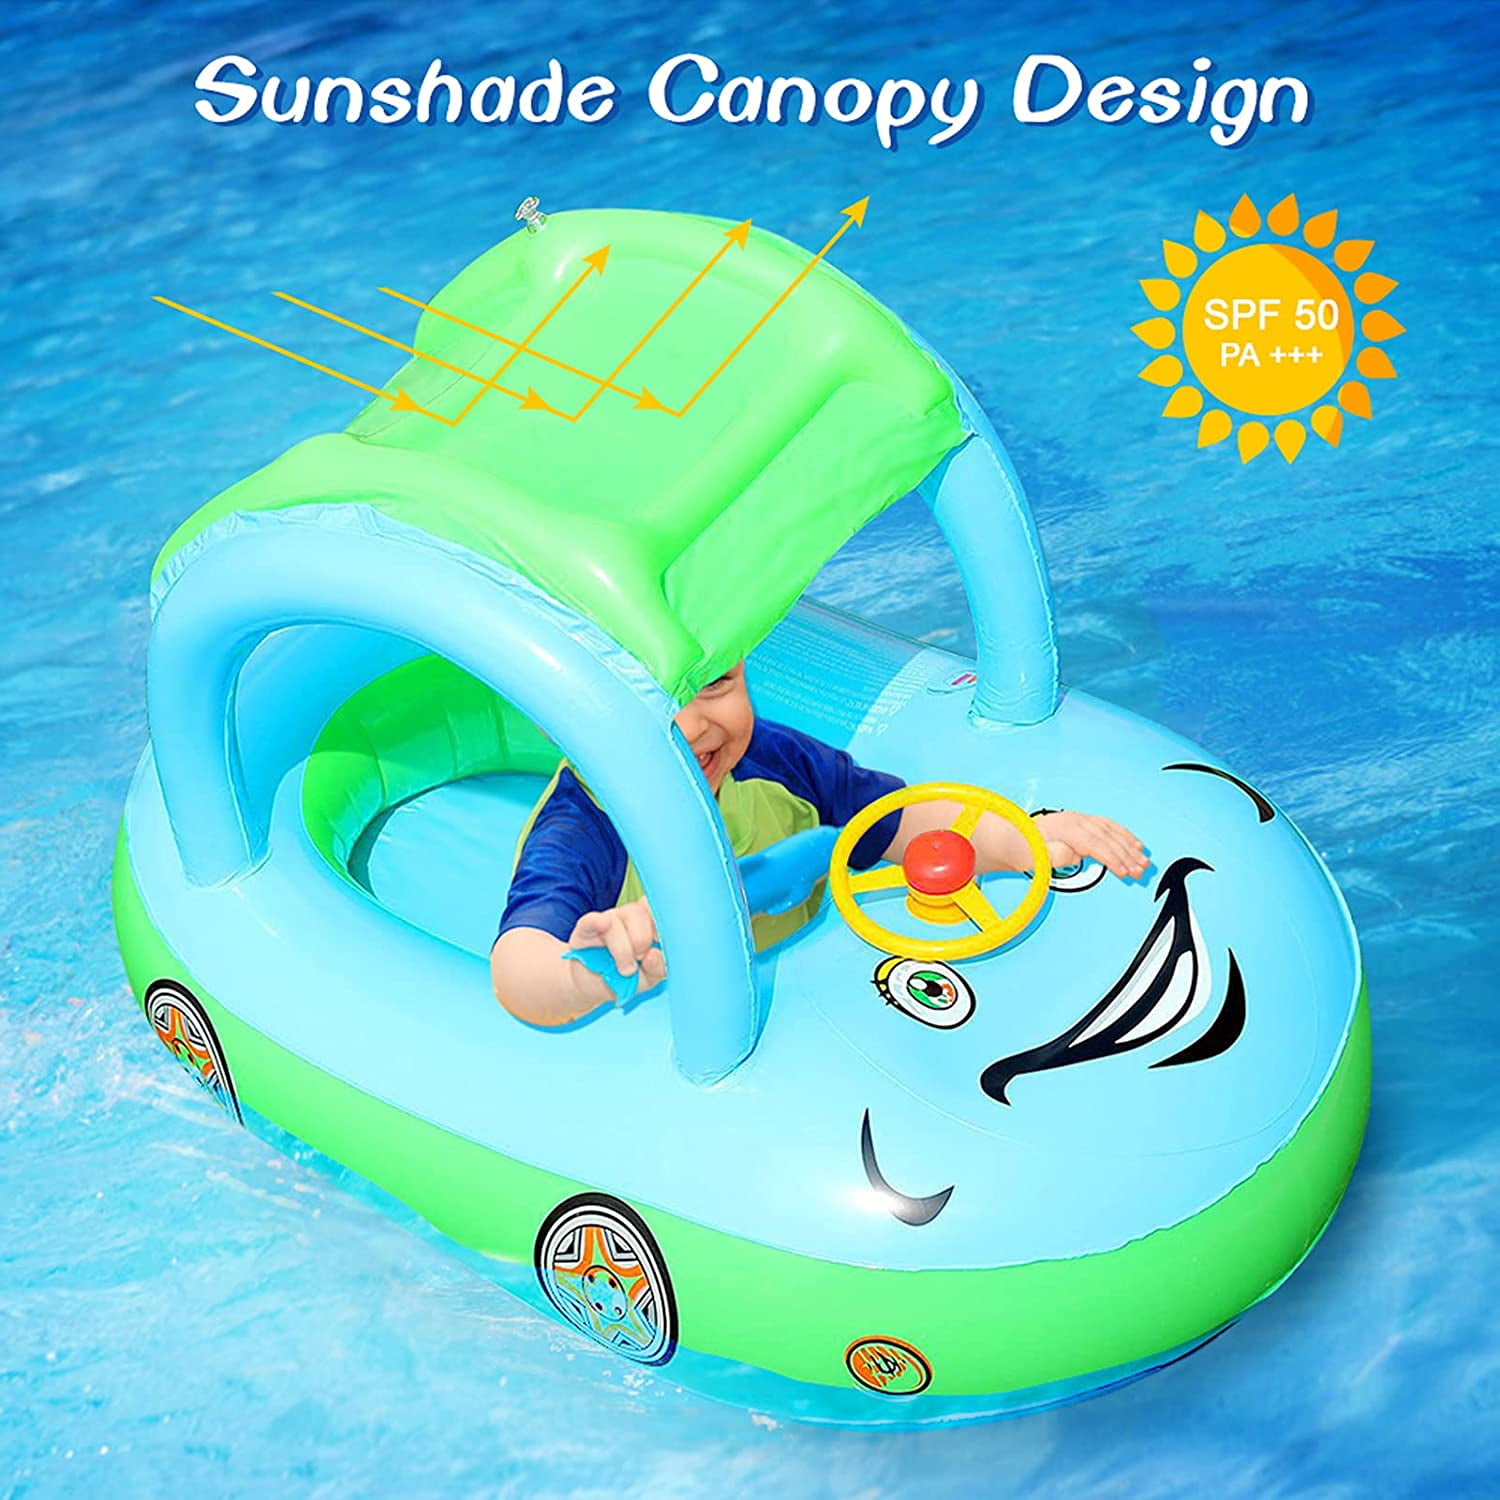 Baby Swimming Ring Inflatable Adjustable Kids Float Seat Water Pool Swim Aid Toy 